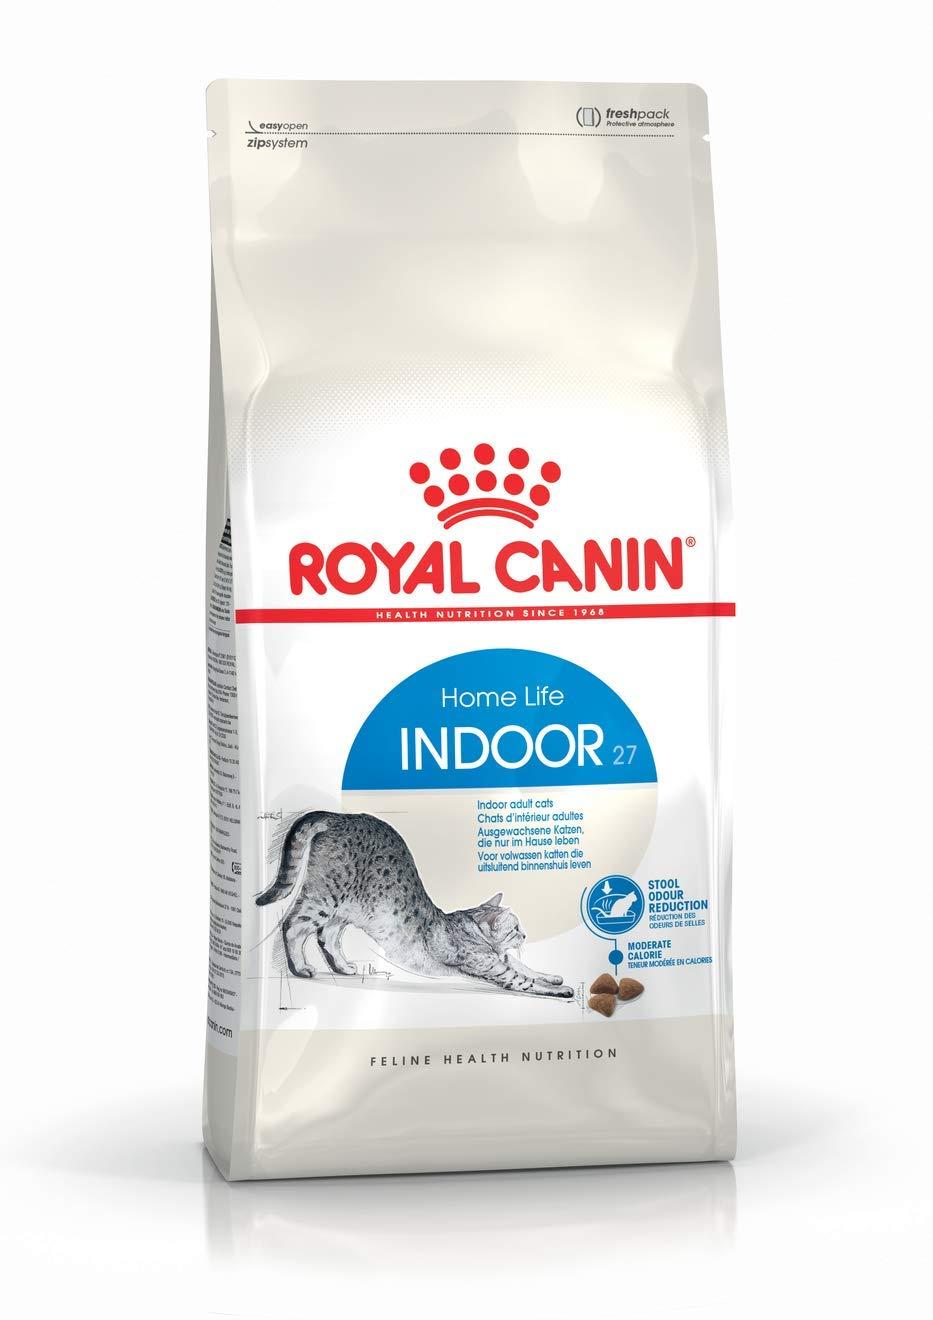 Selected image for Royal Canin Cat Adult Indoor 27 2 KG